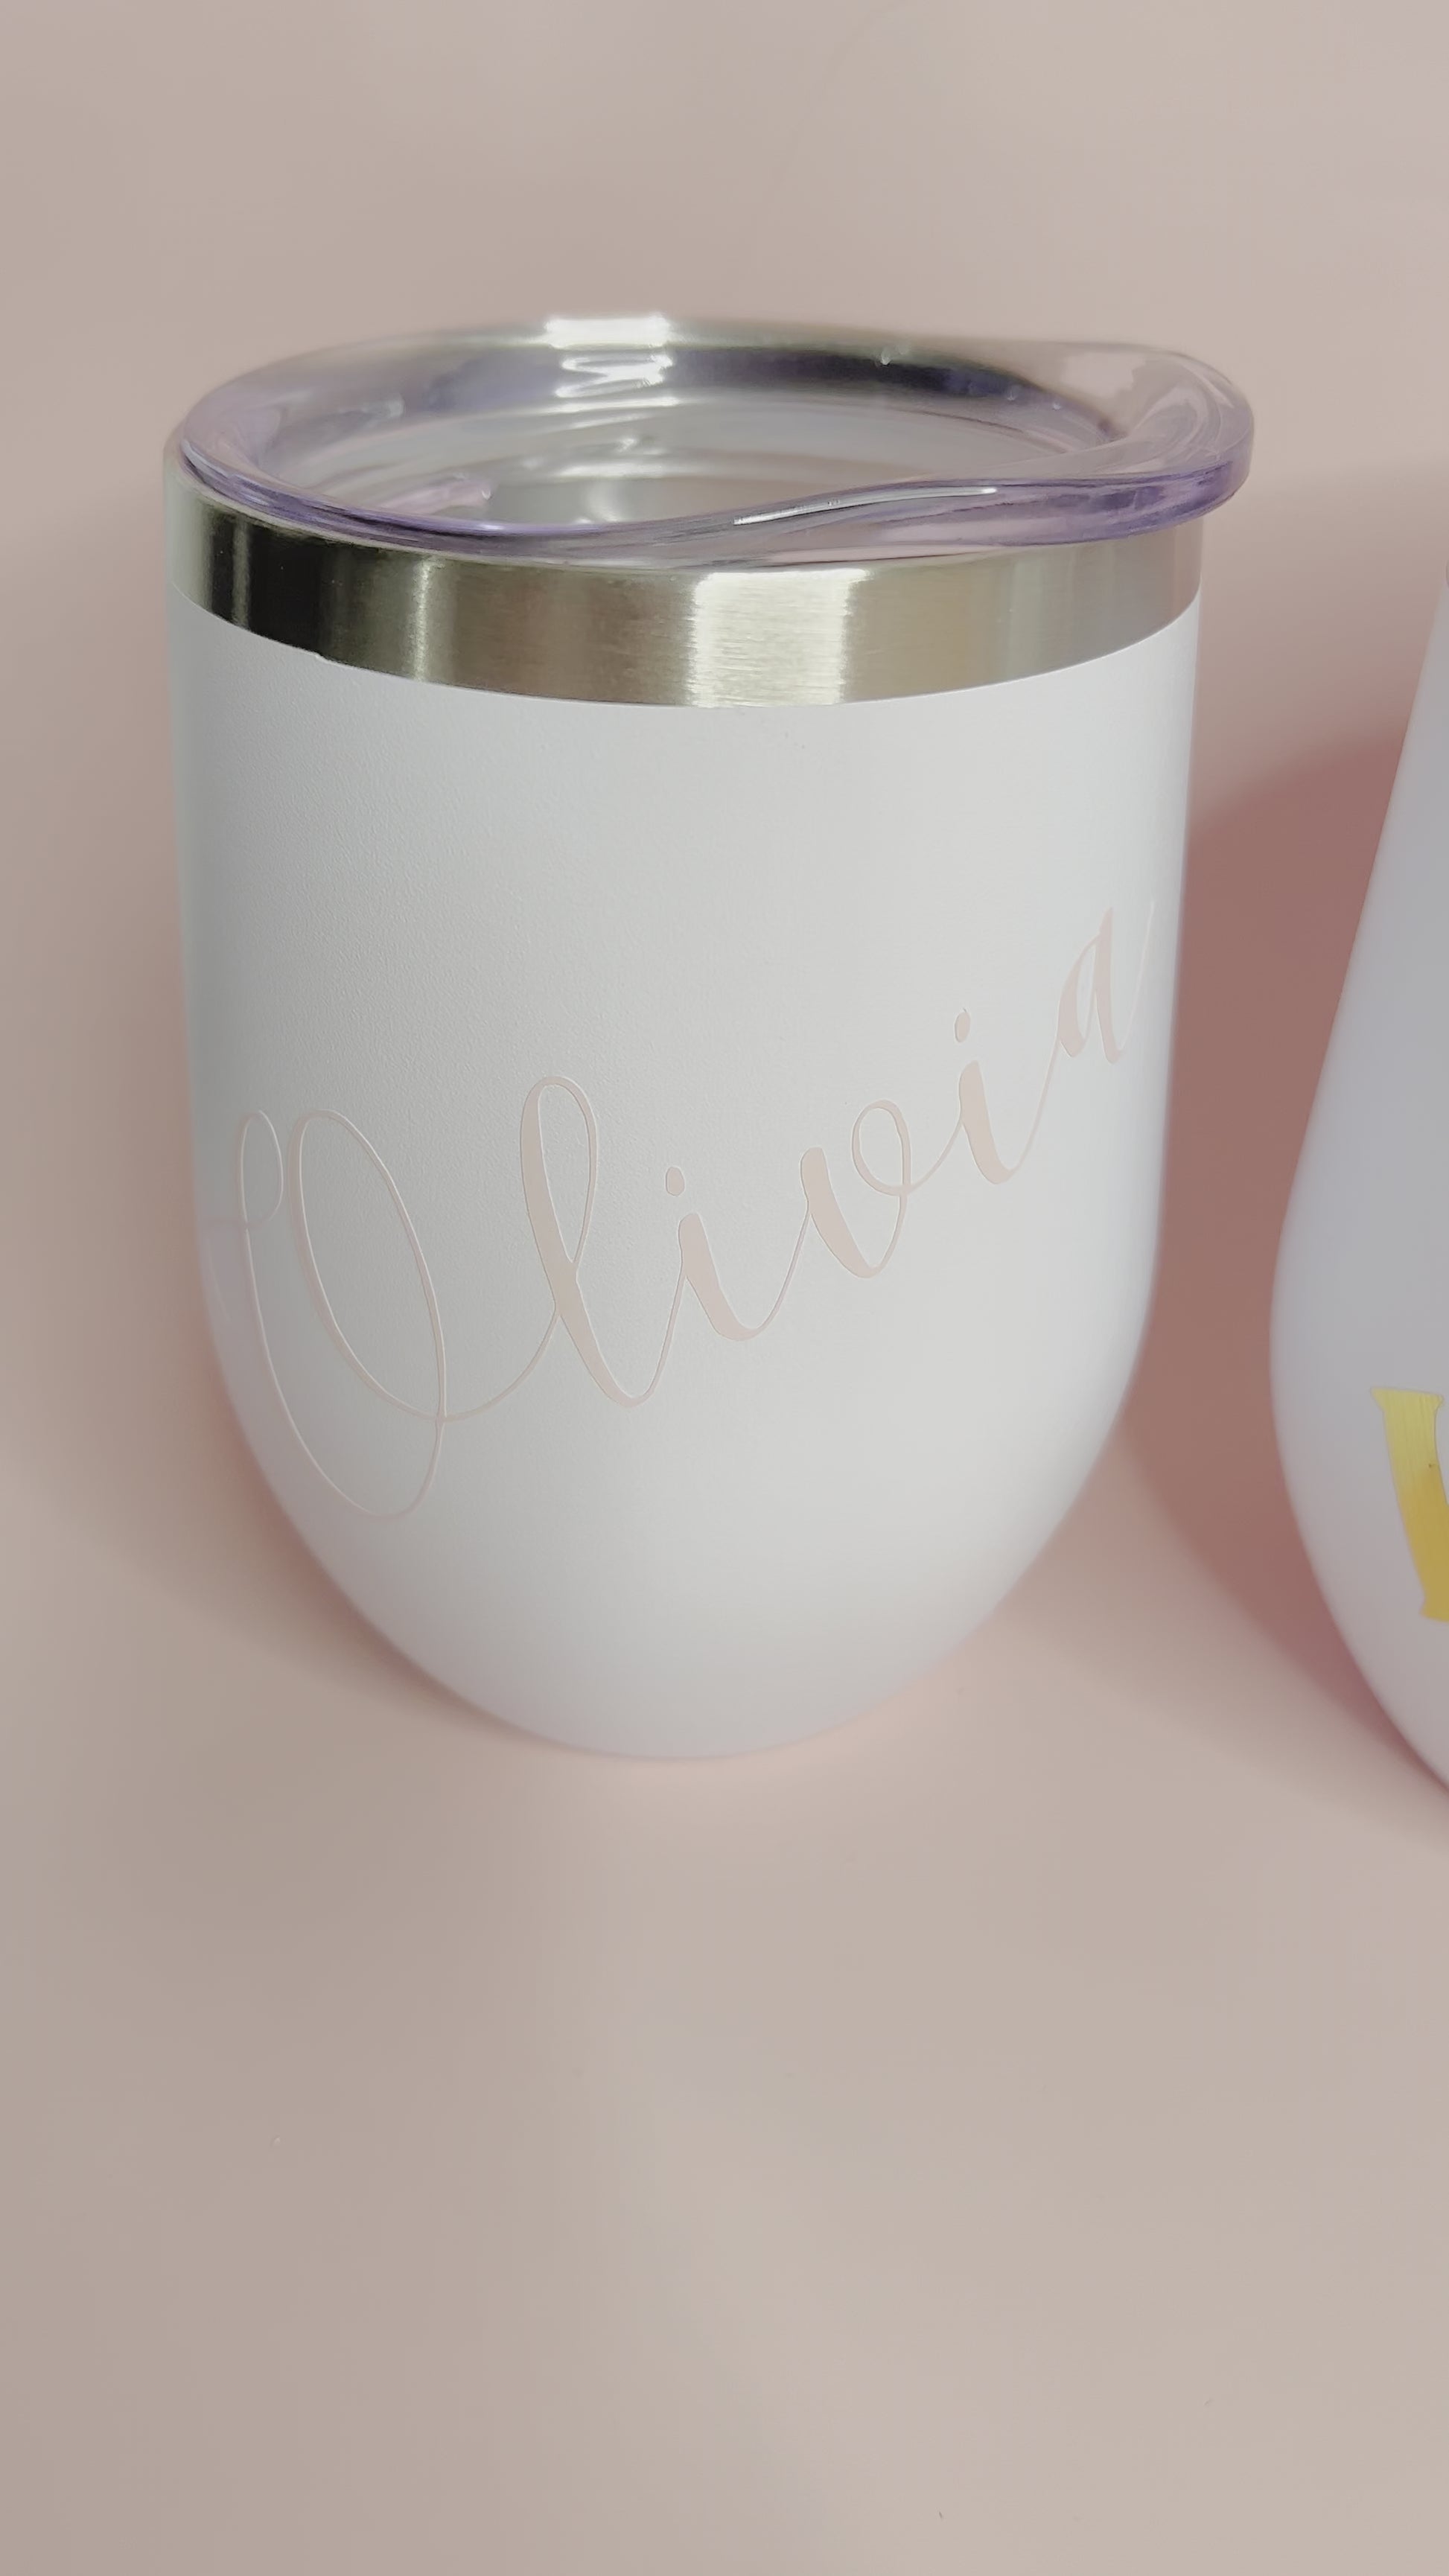 White personalized Stainless Steel 12oz insulated Tumbler with lid (Dishwasher Safe on normal cycle) Personalize with name or phrase and choose your text color and font